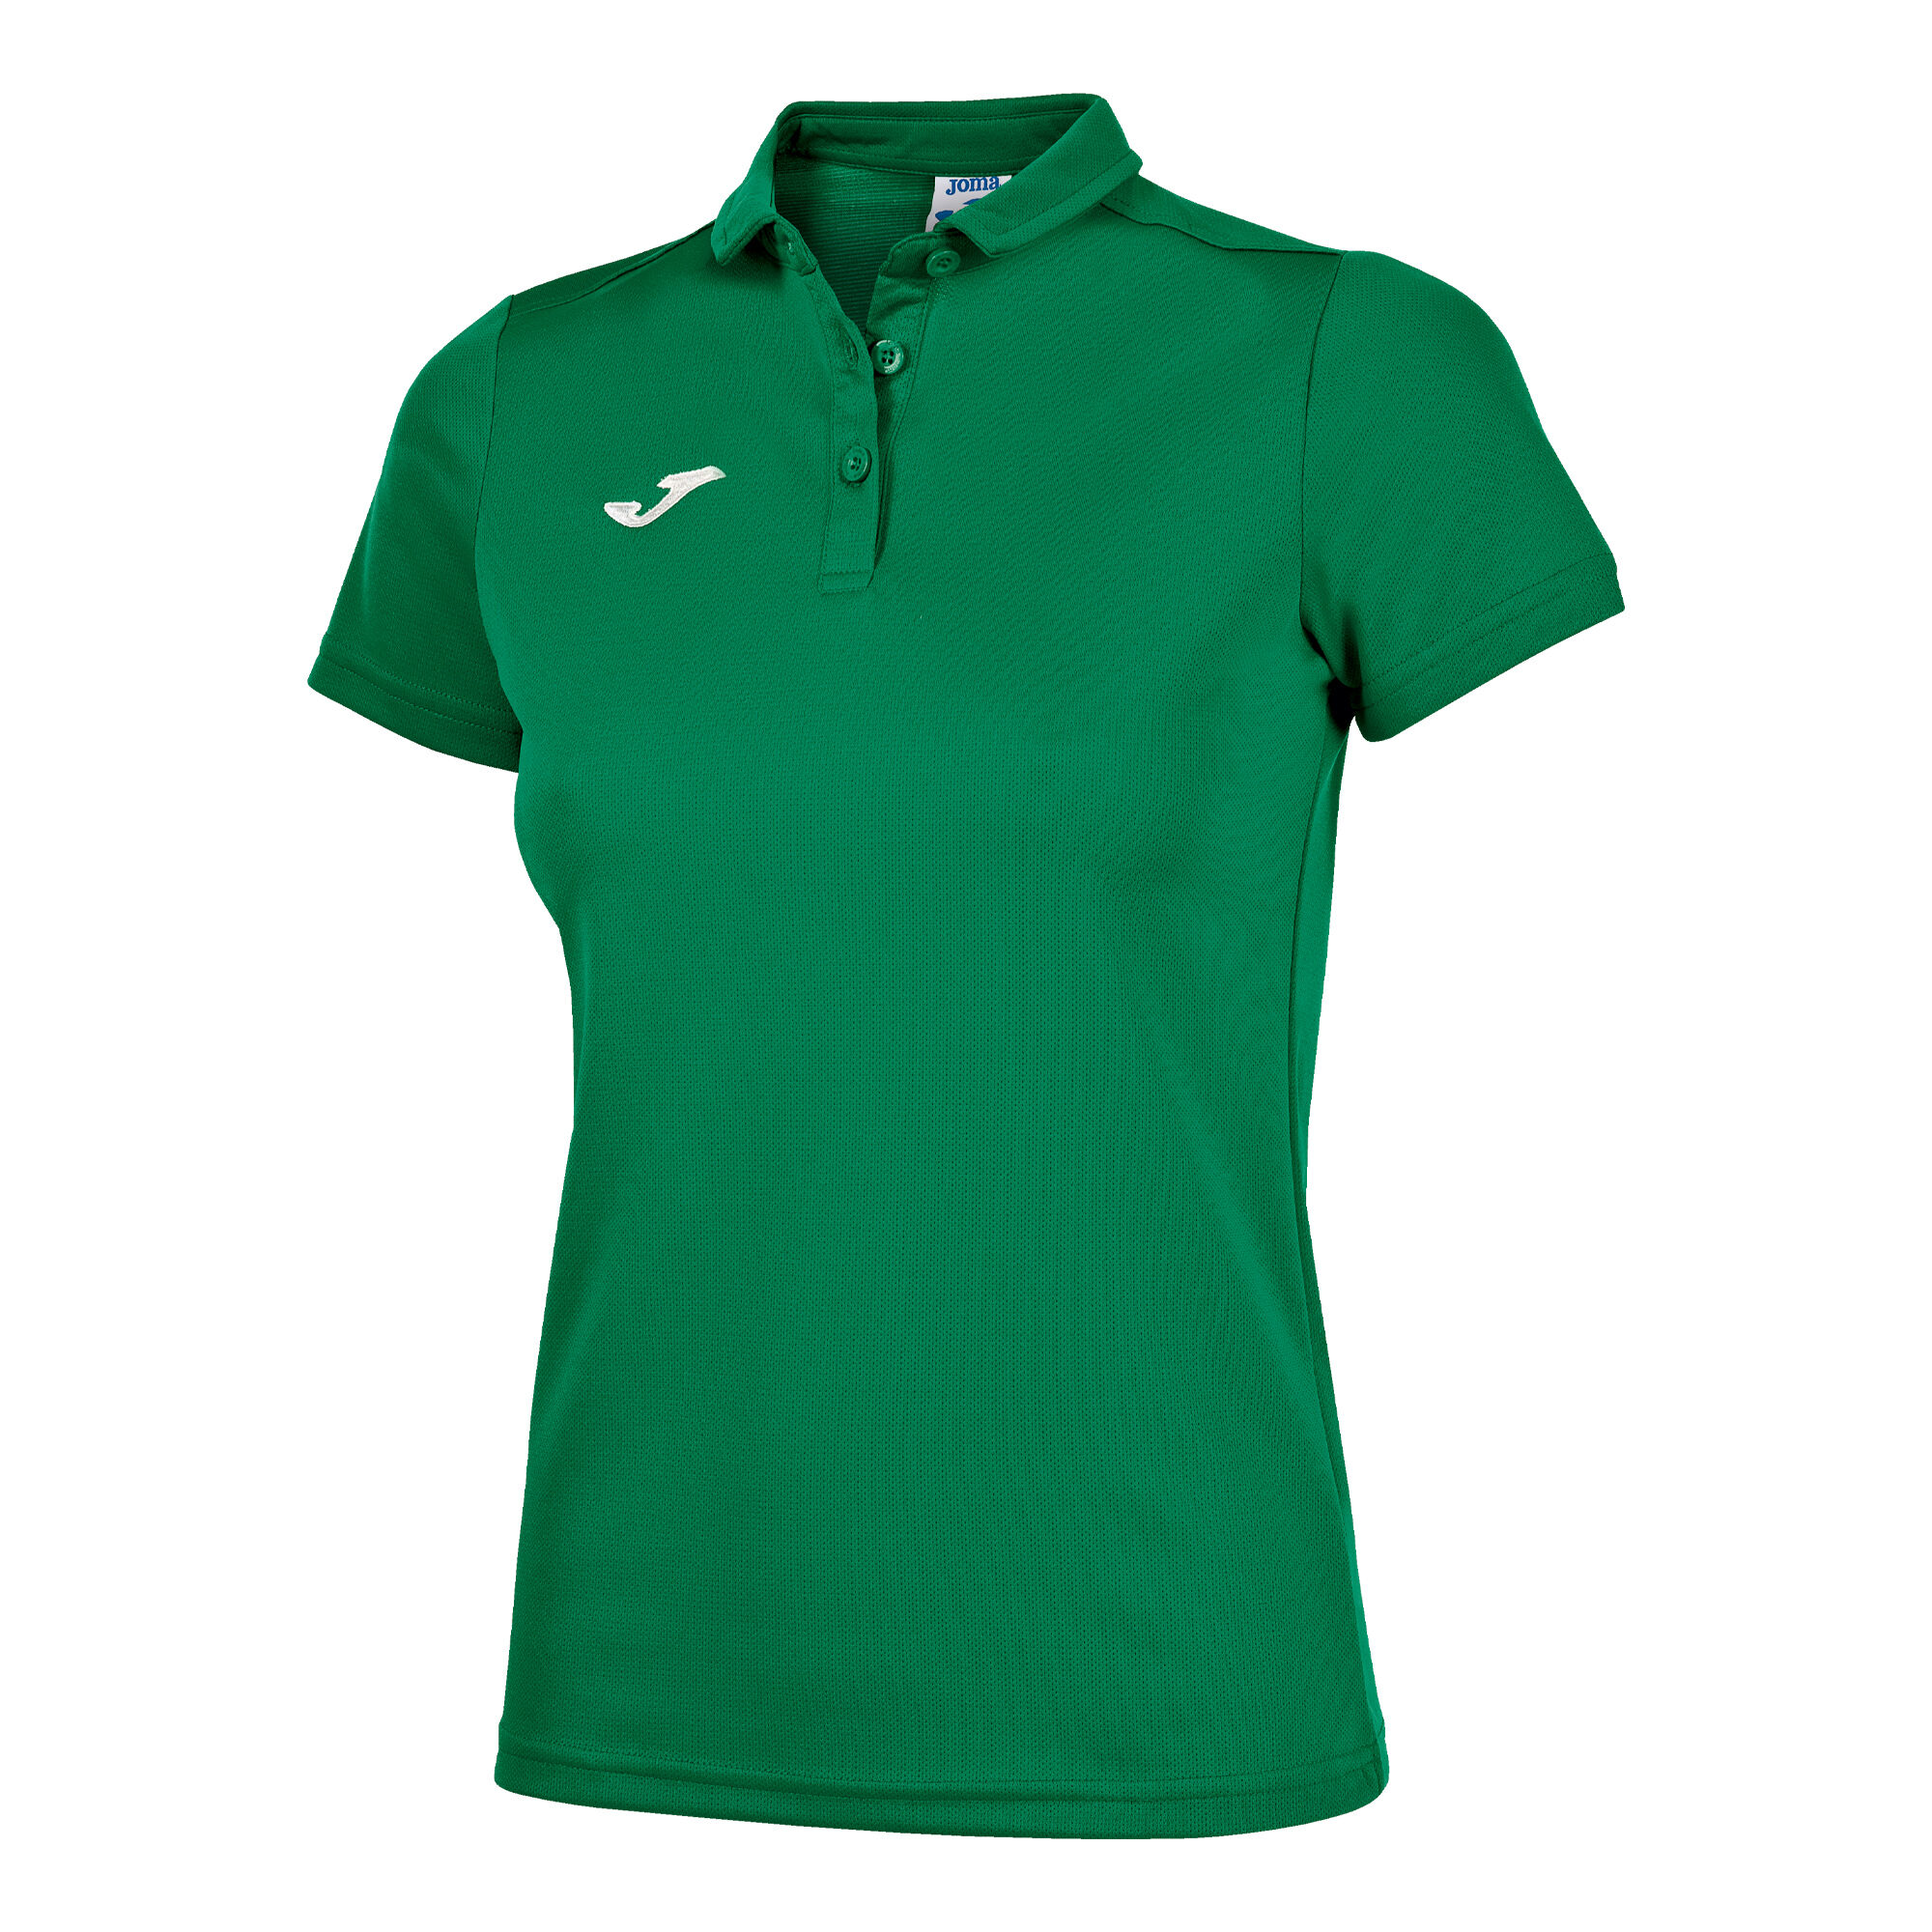 POLO MANCHES COURTES FEMME HOBBY VERT